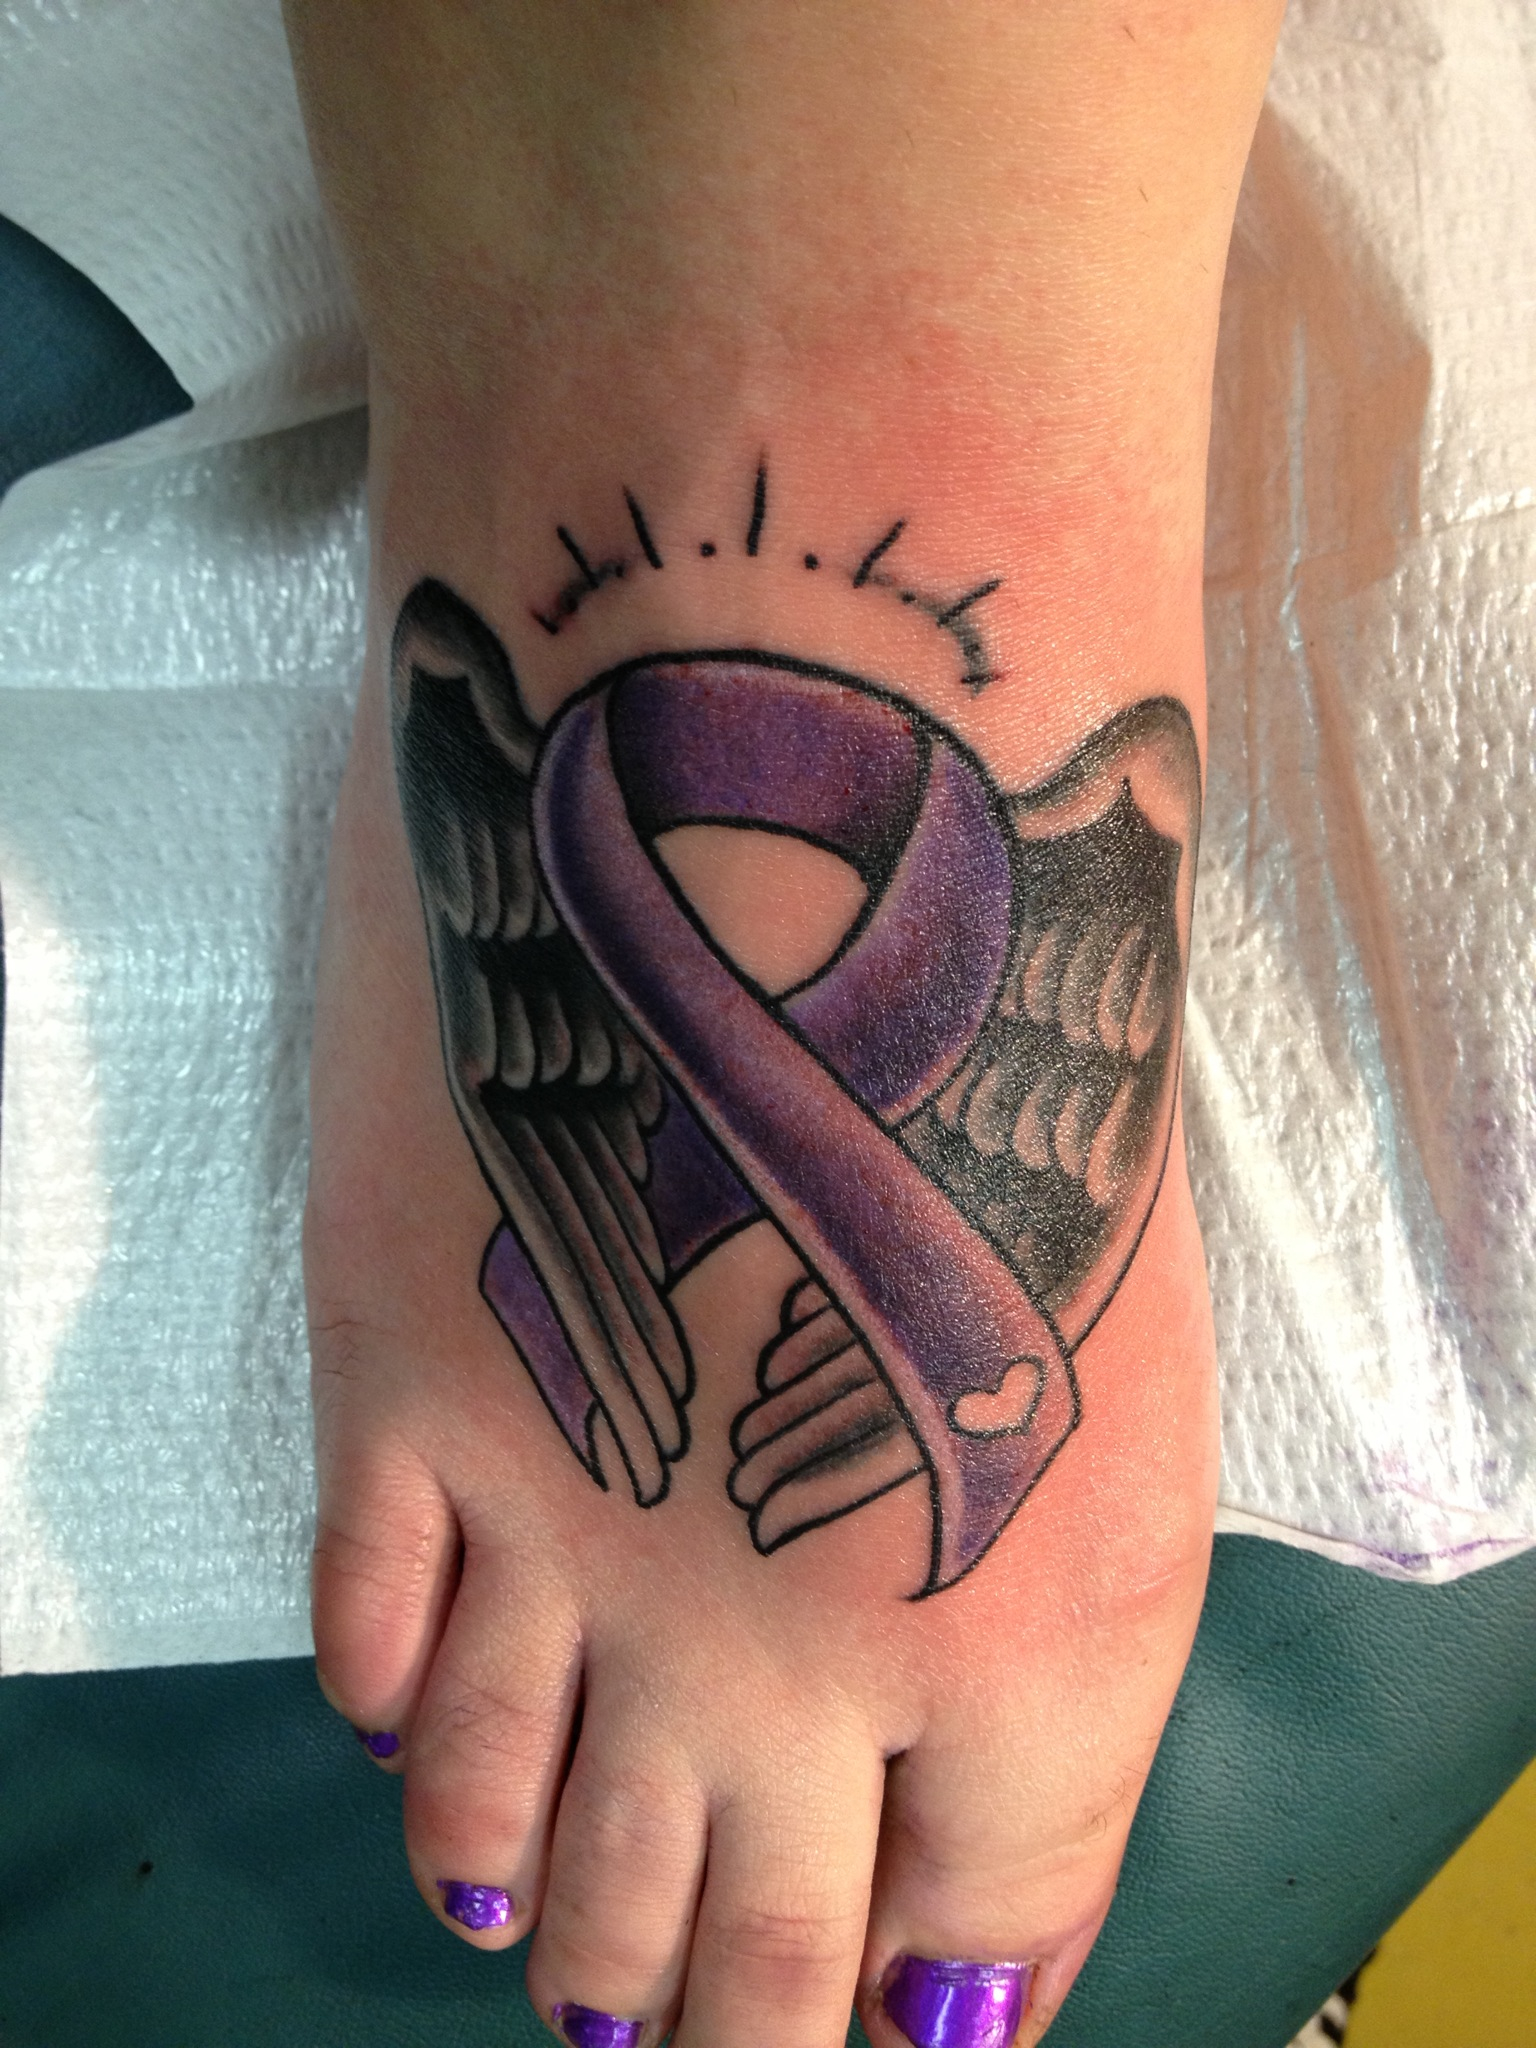 Cancer Ribbon Tattoos Designs, Ideas and Meaning | Tattoos For You